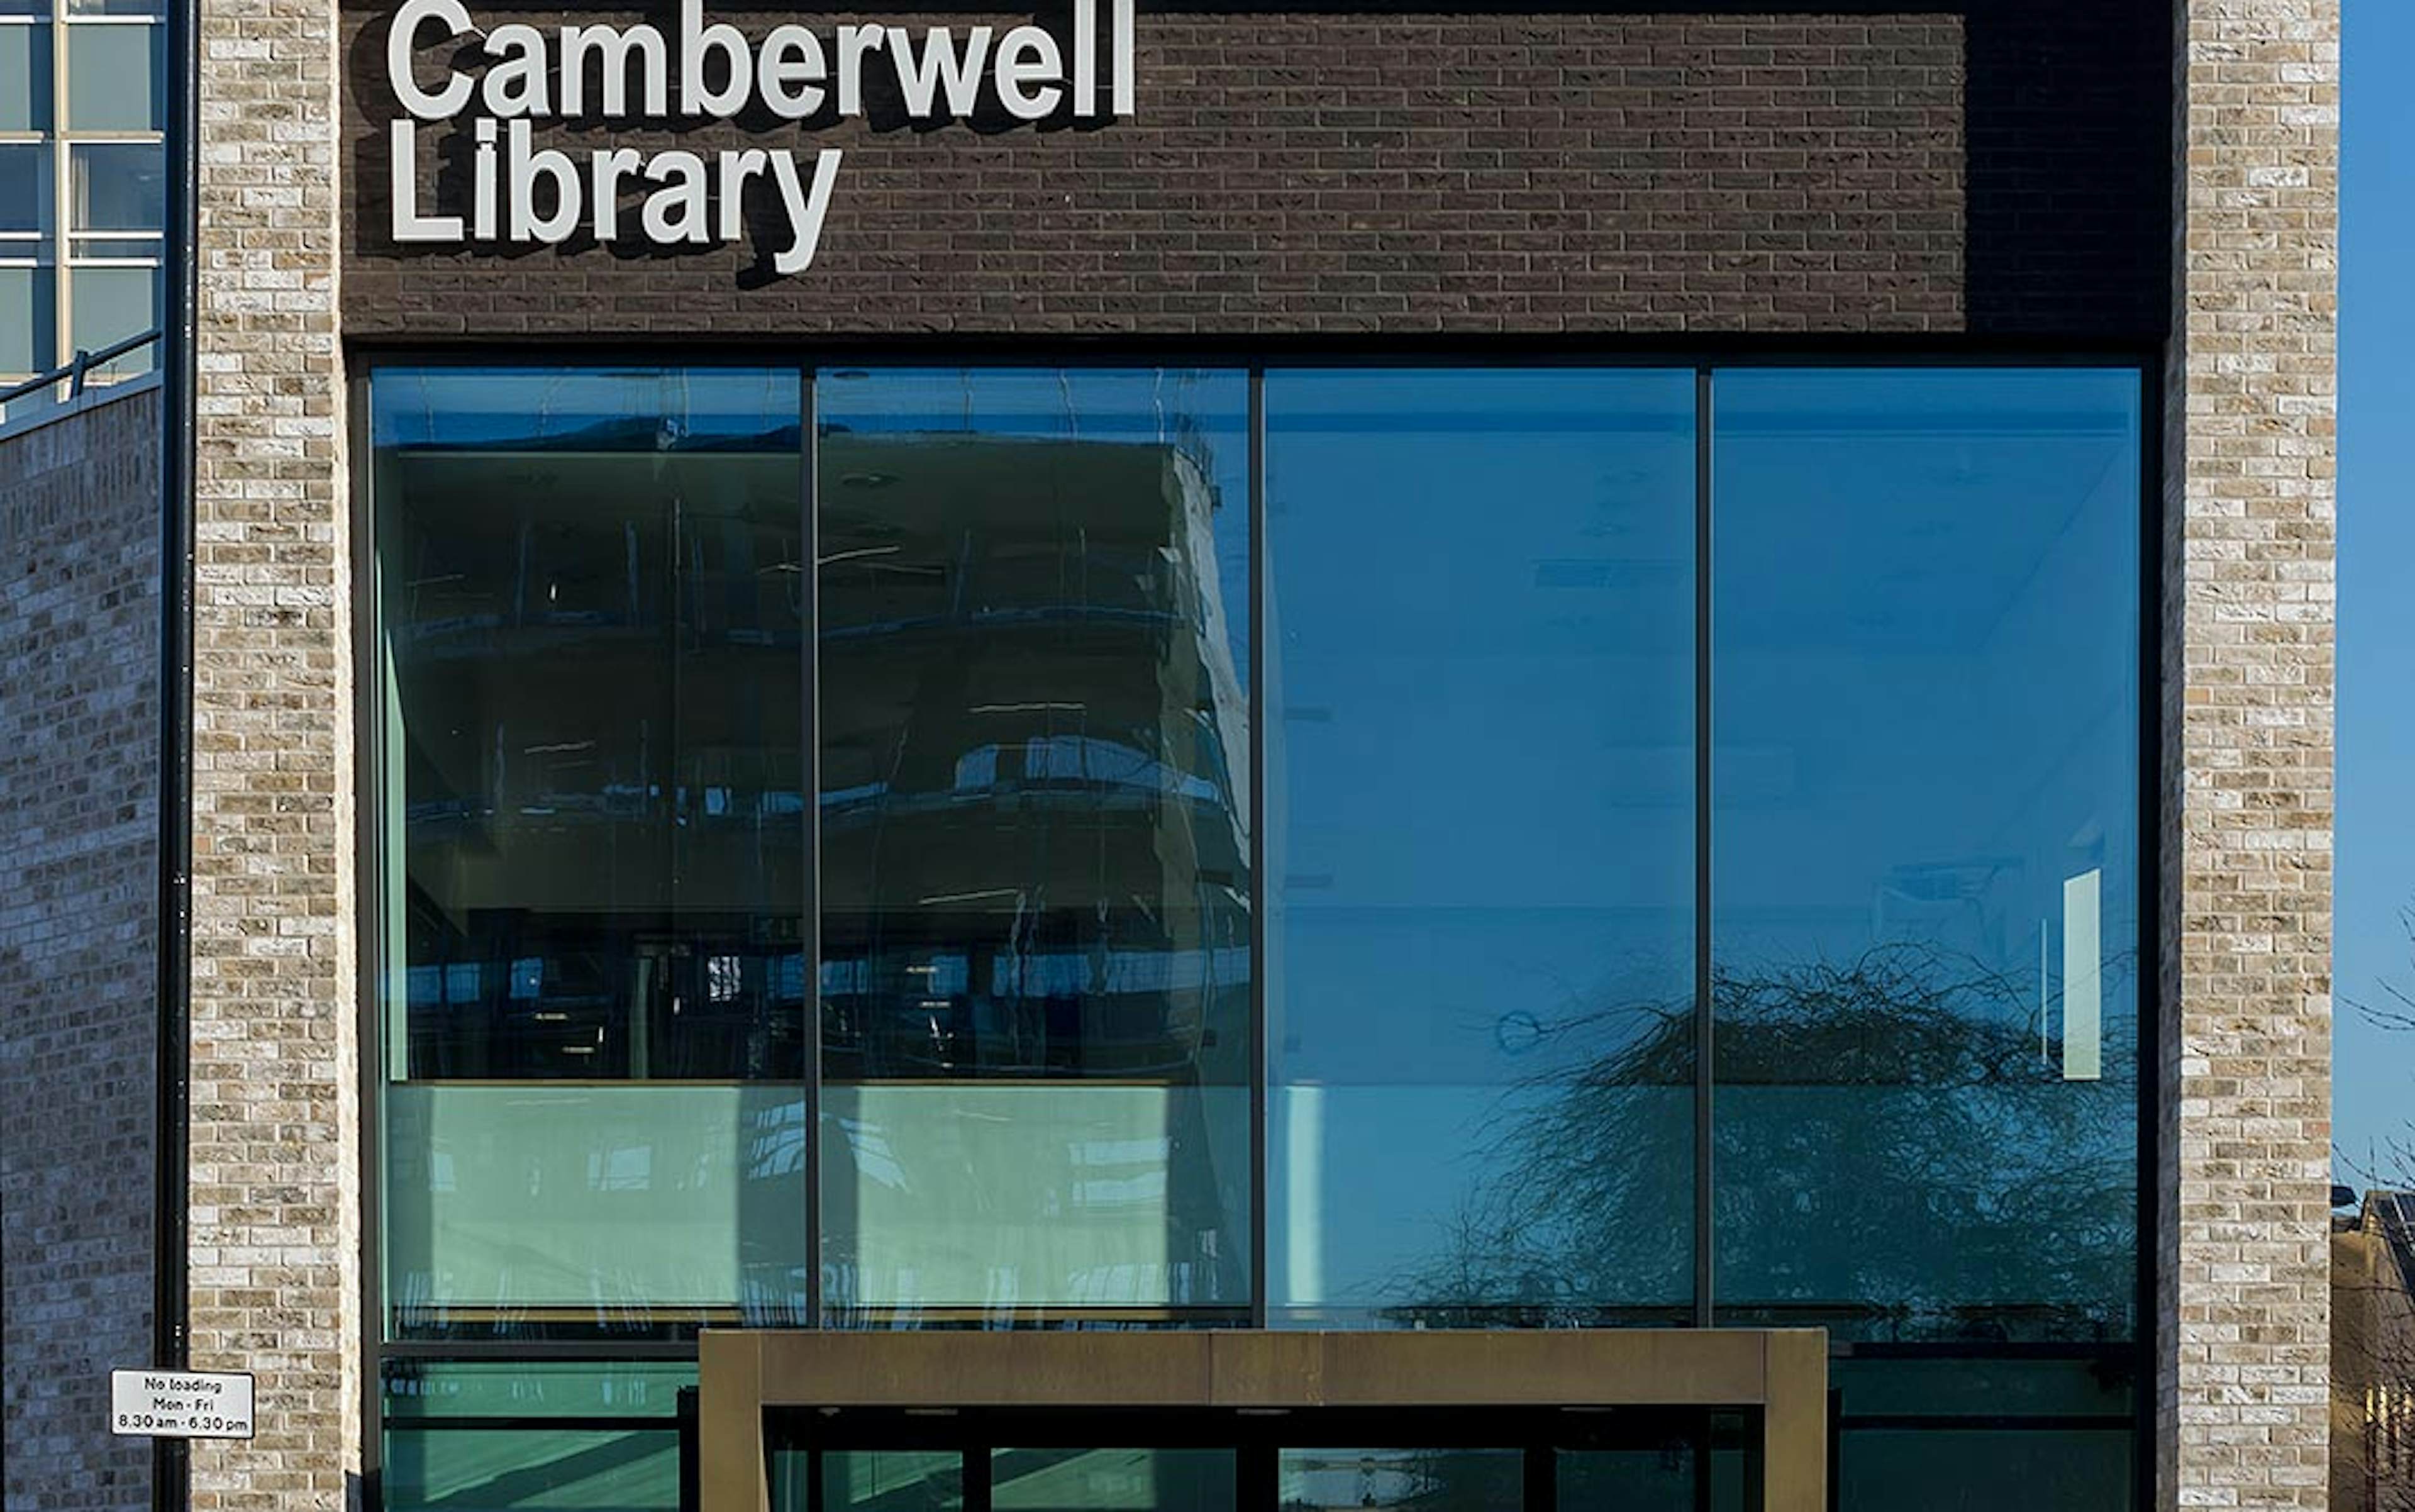 Camberwell Library - image 1